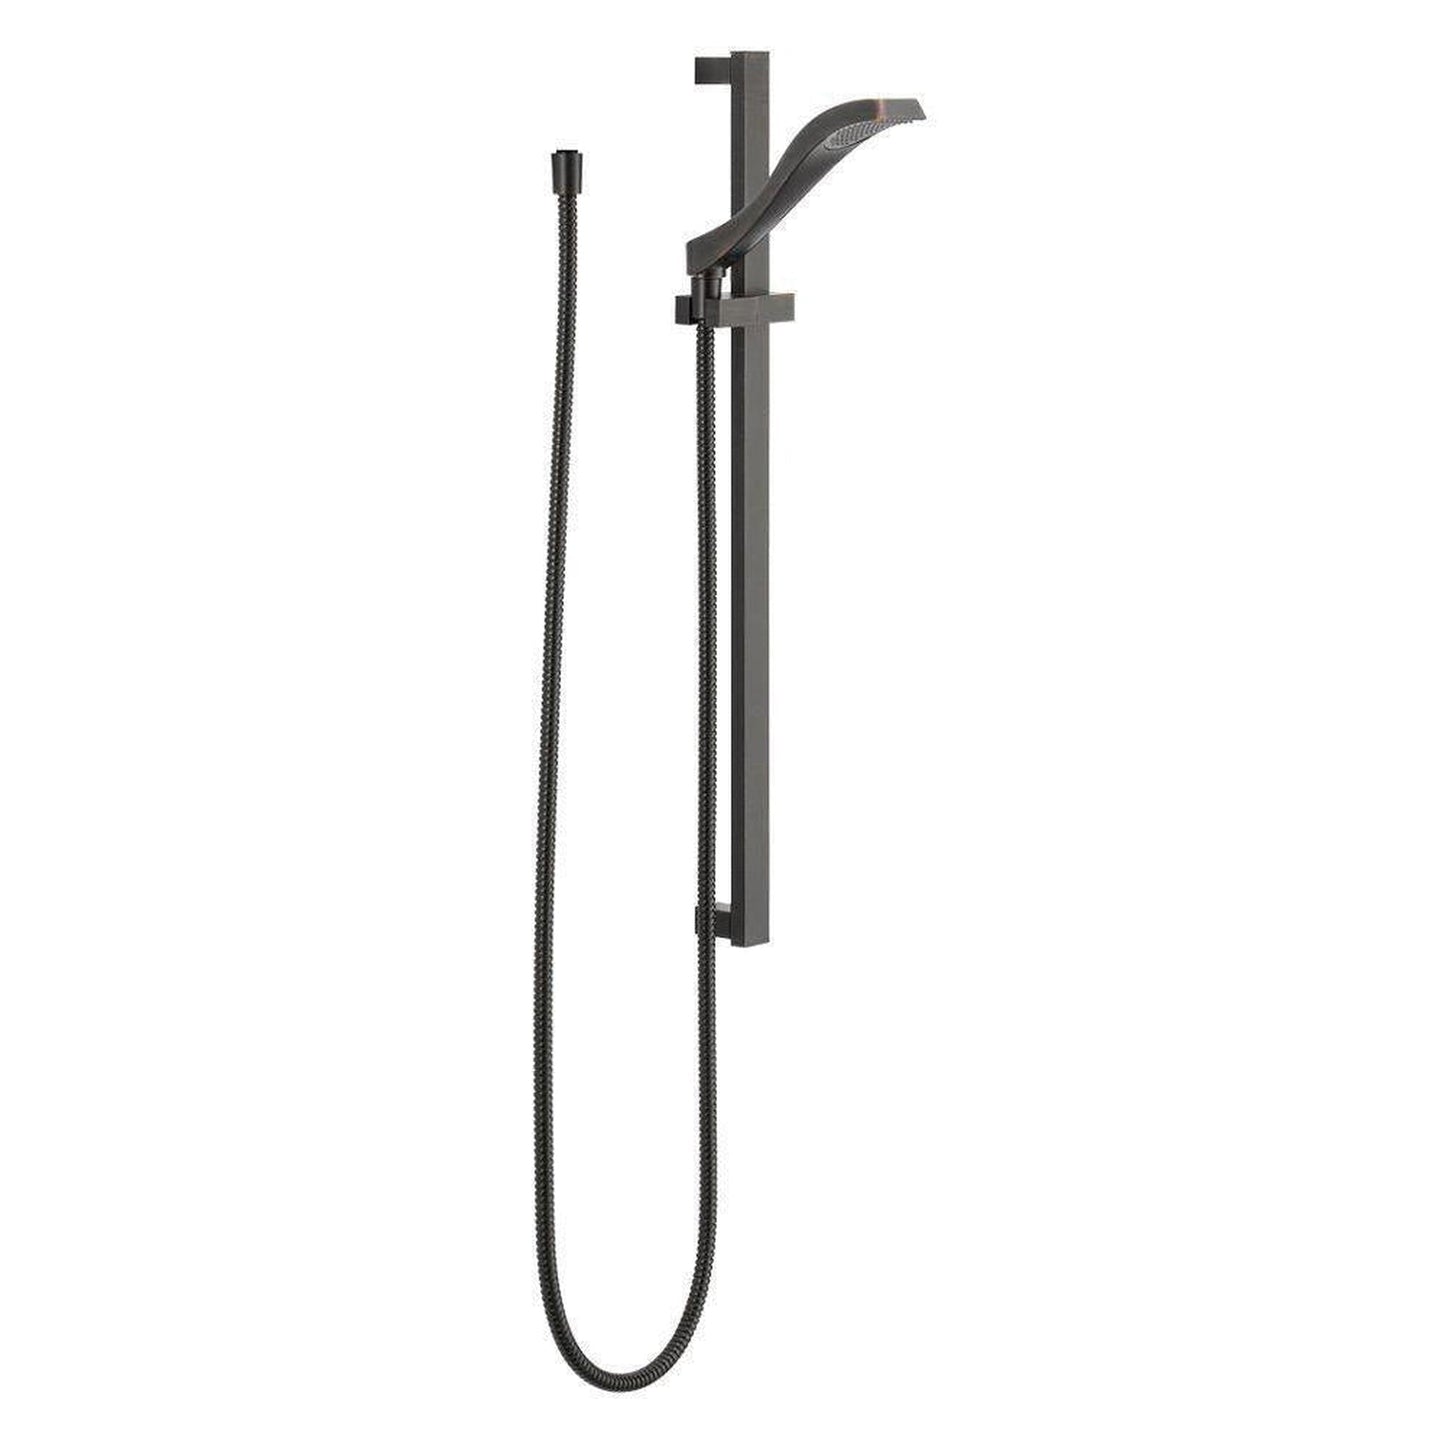 Fontana Creative Luxury Matte Black Square Wall-Mounted Shower Head Rainfall Shower System With 3-Way Touch Button Thermostatic Concealed Brass Mixer and Hand Shower